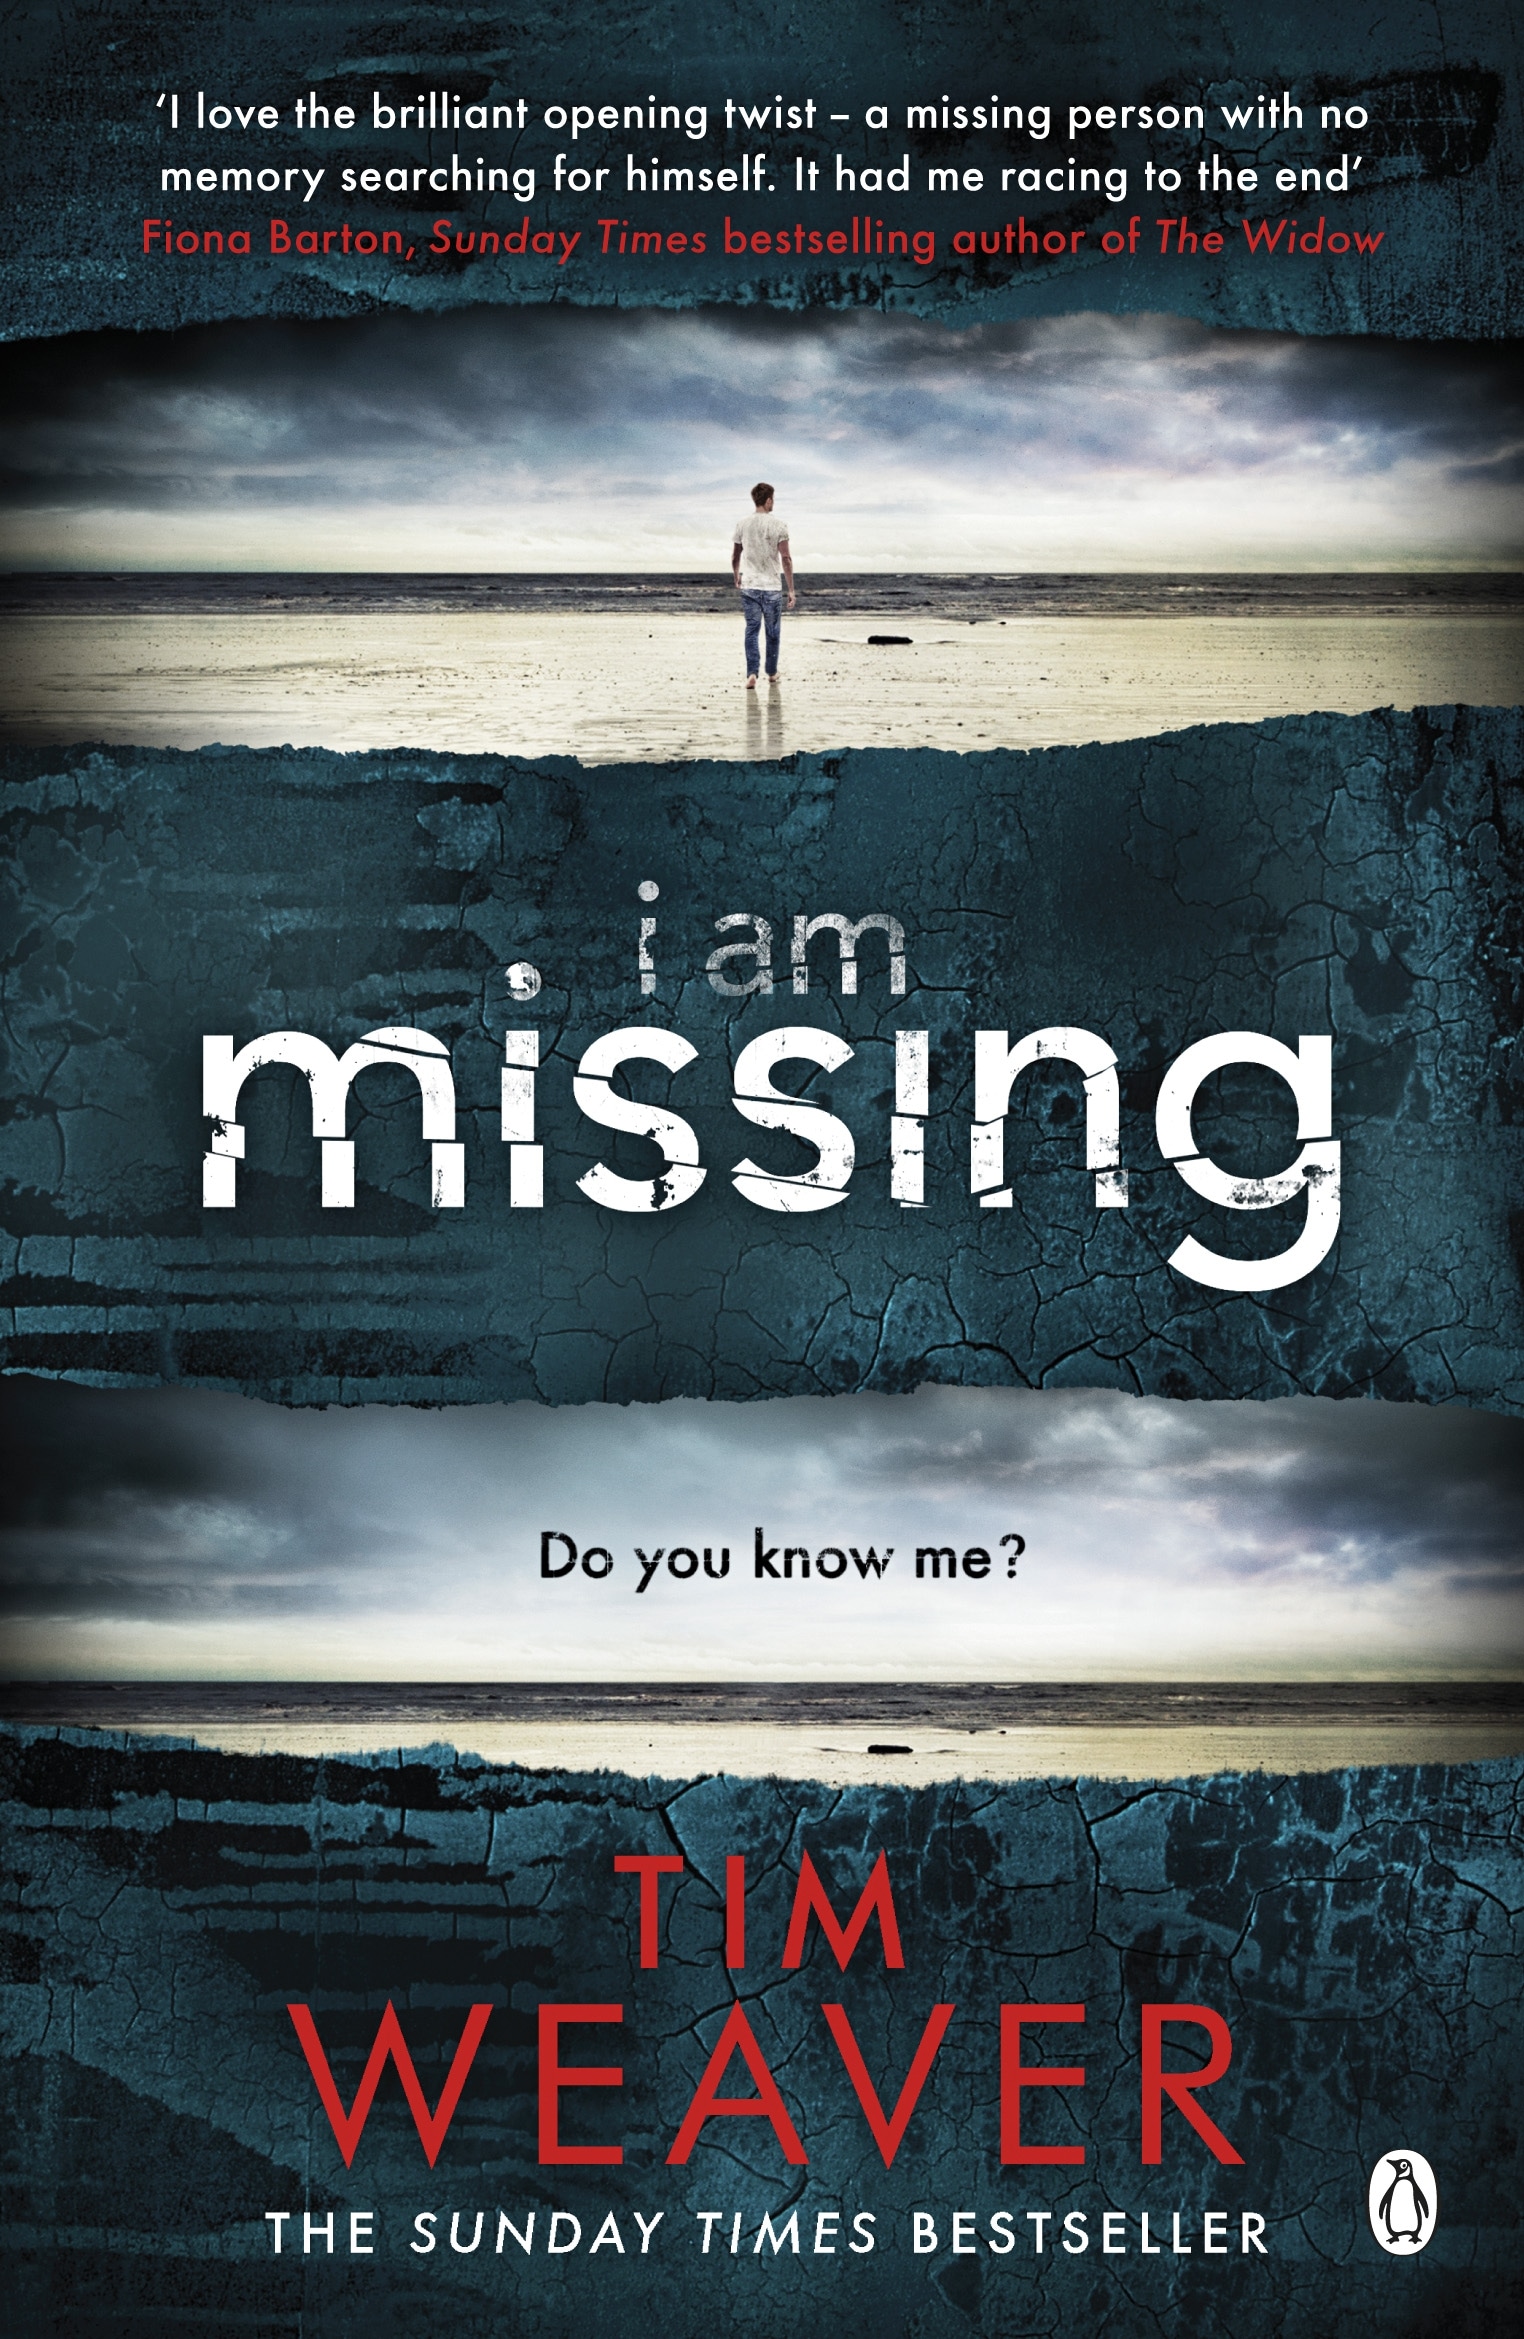 Book “I Am Missing” by Tim Weaver — July 27, 2017